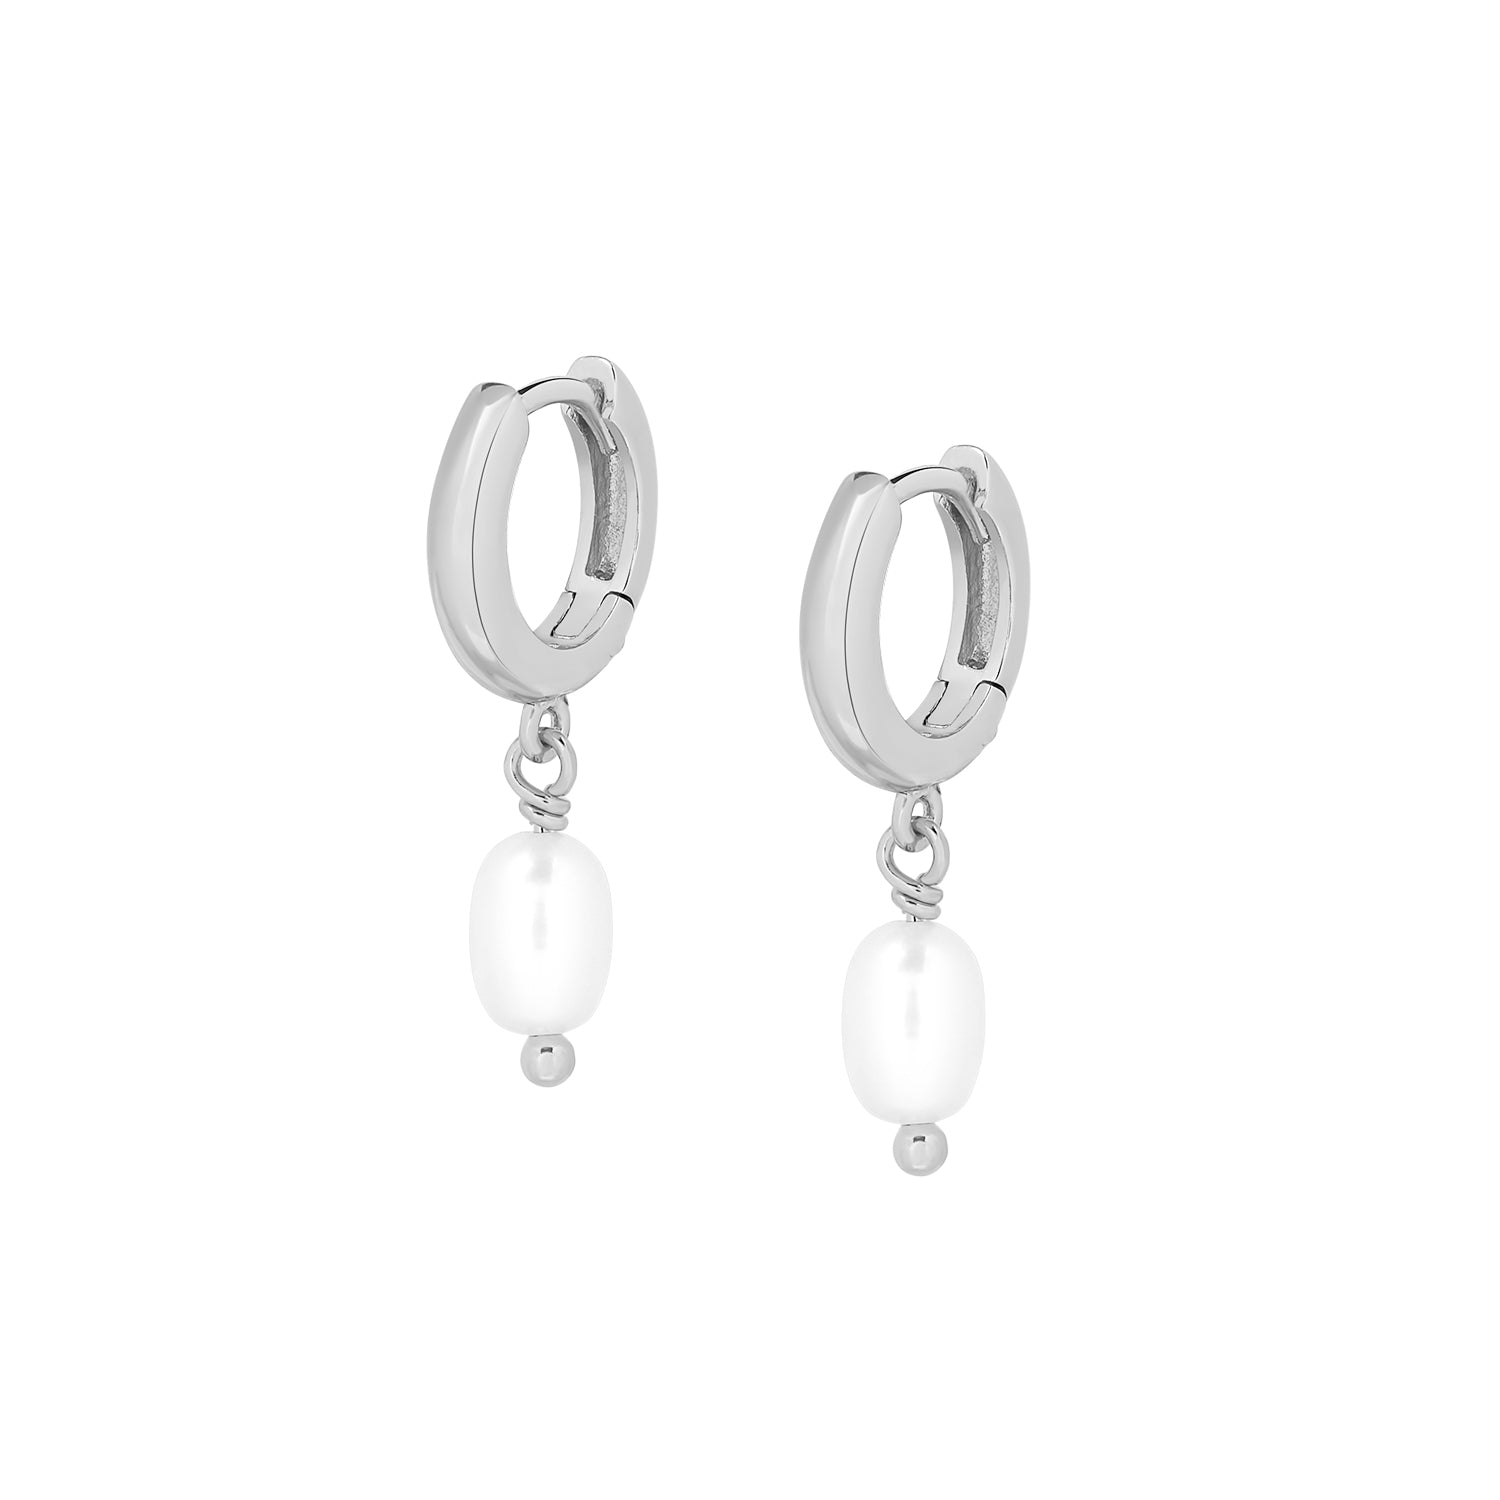 Elegant and statement earrings. 925 silver drop huggies set with pearls.